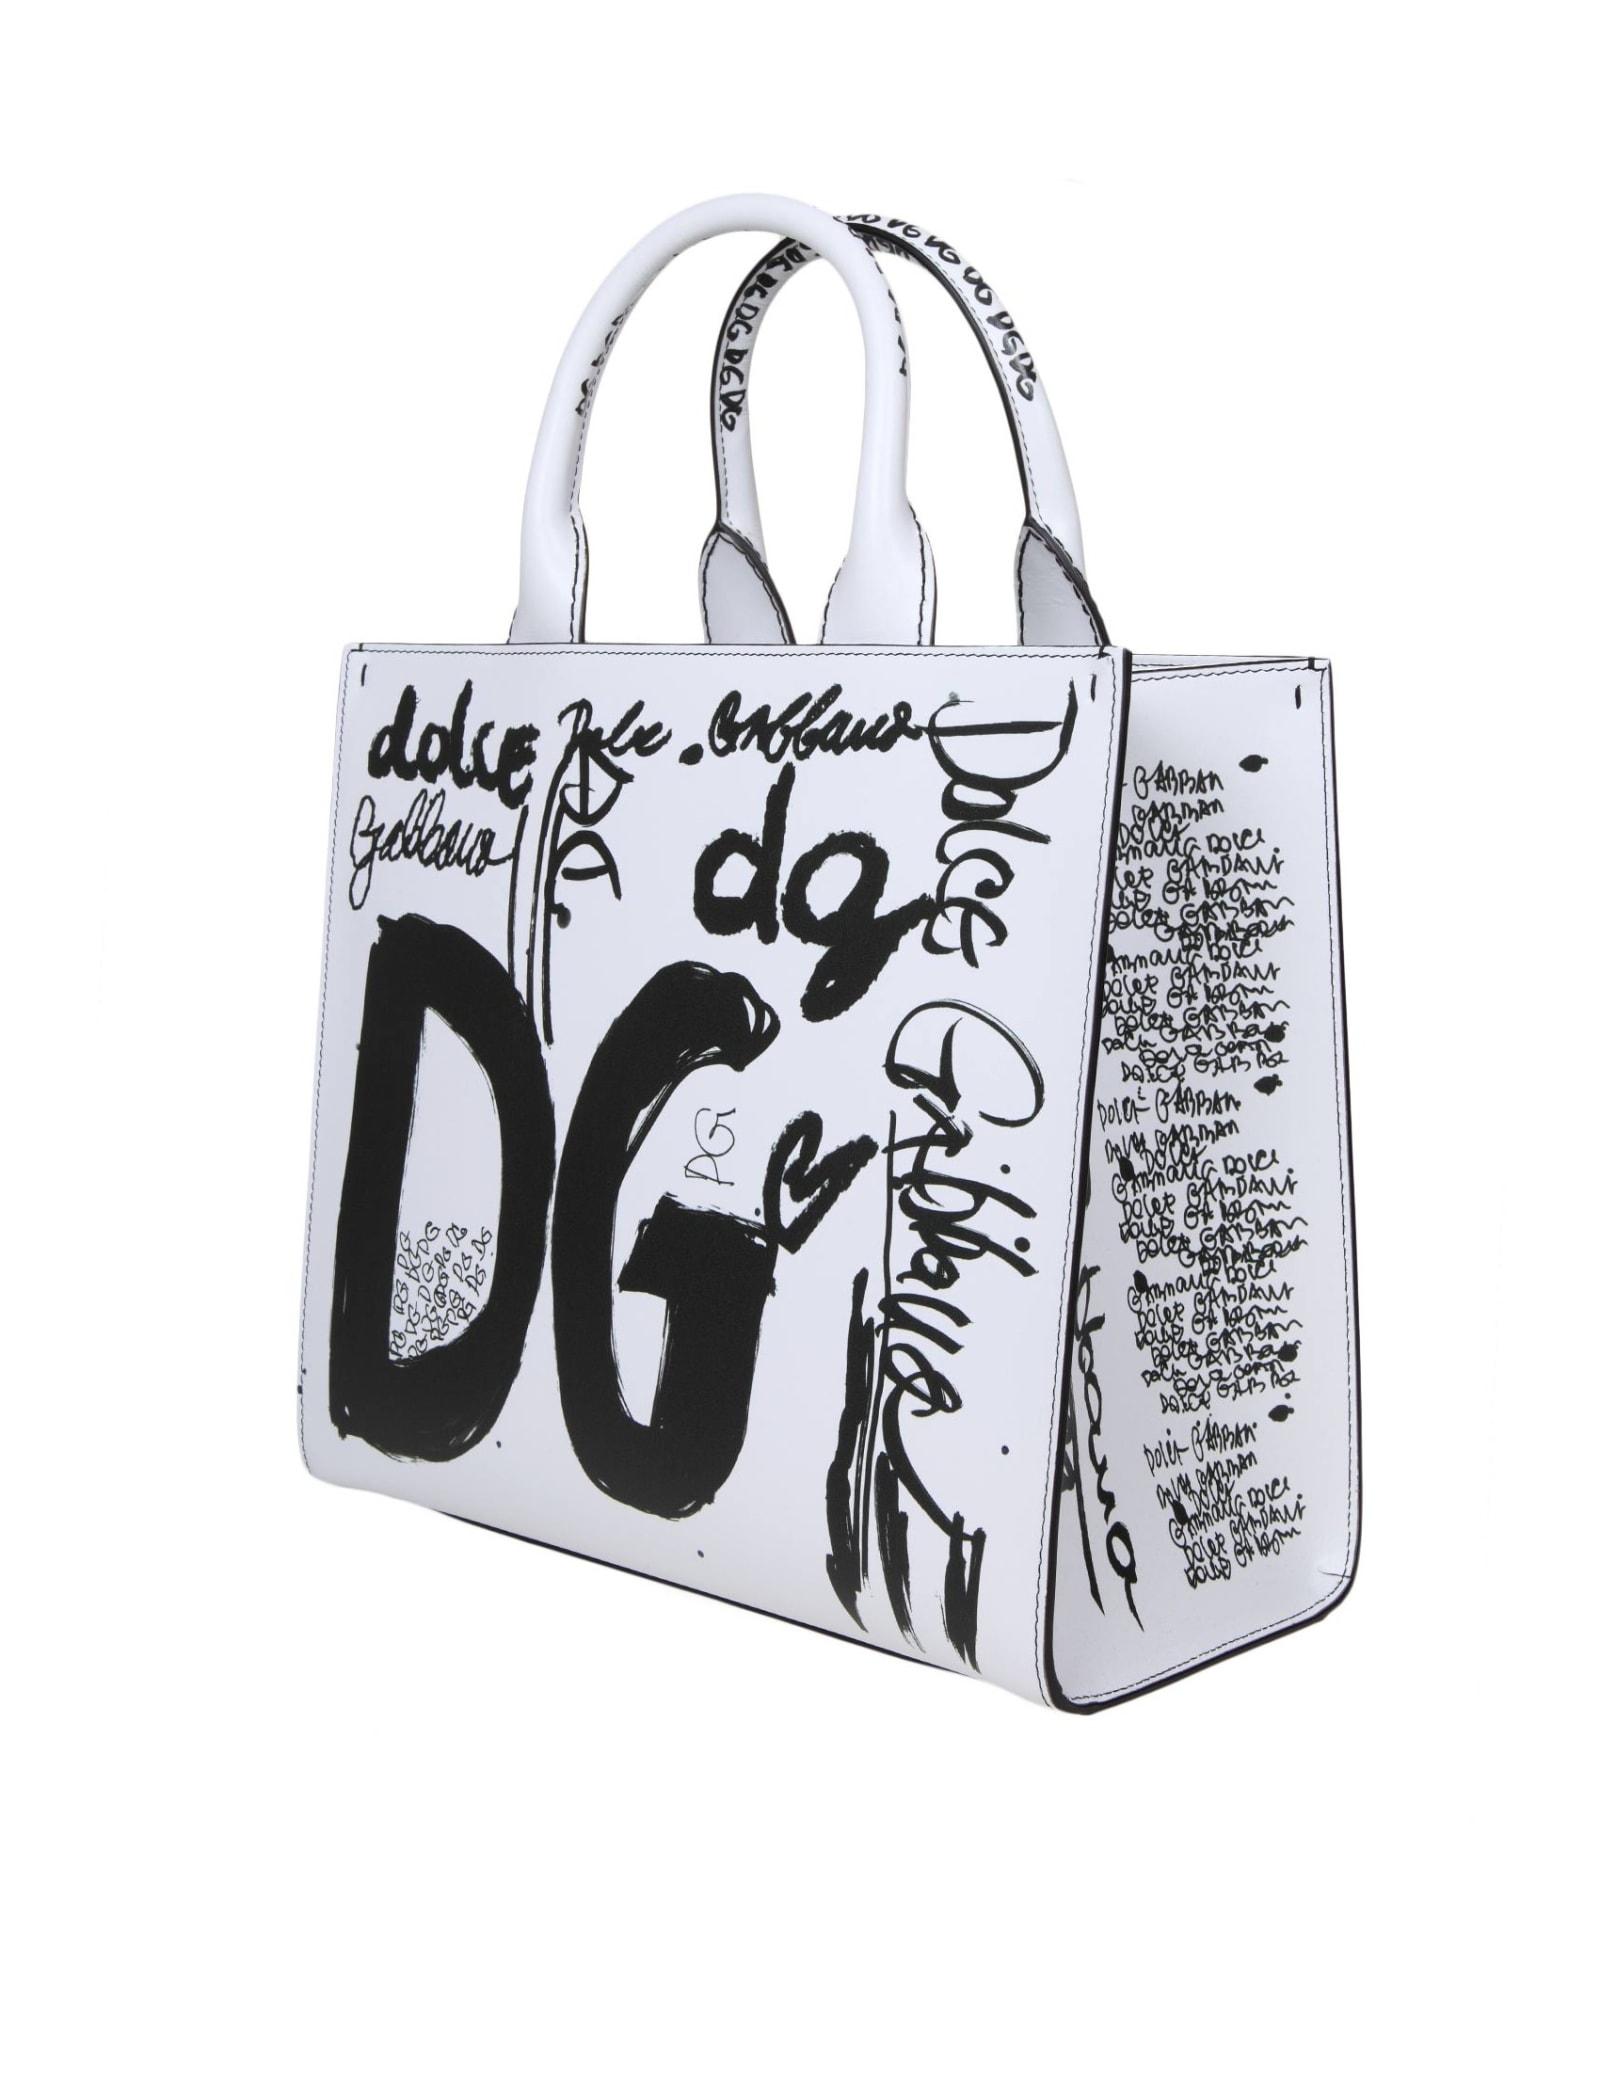 Dolce & Gabbana Leather Tote Bag With Graffiti Print in White | Lyst